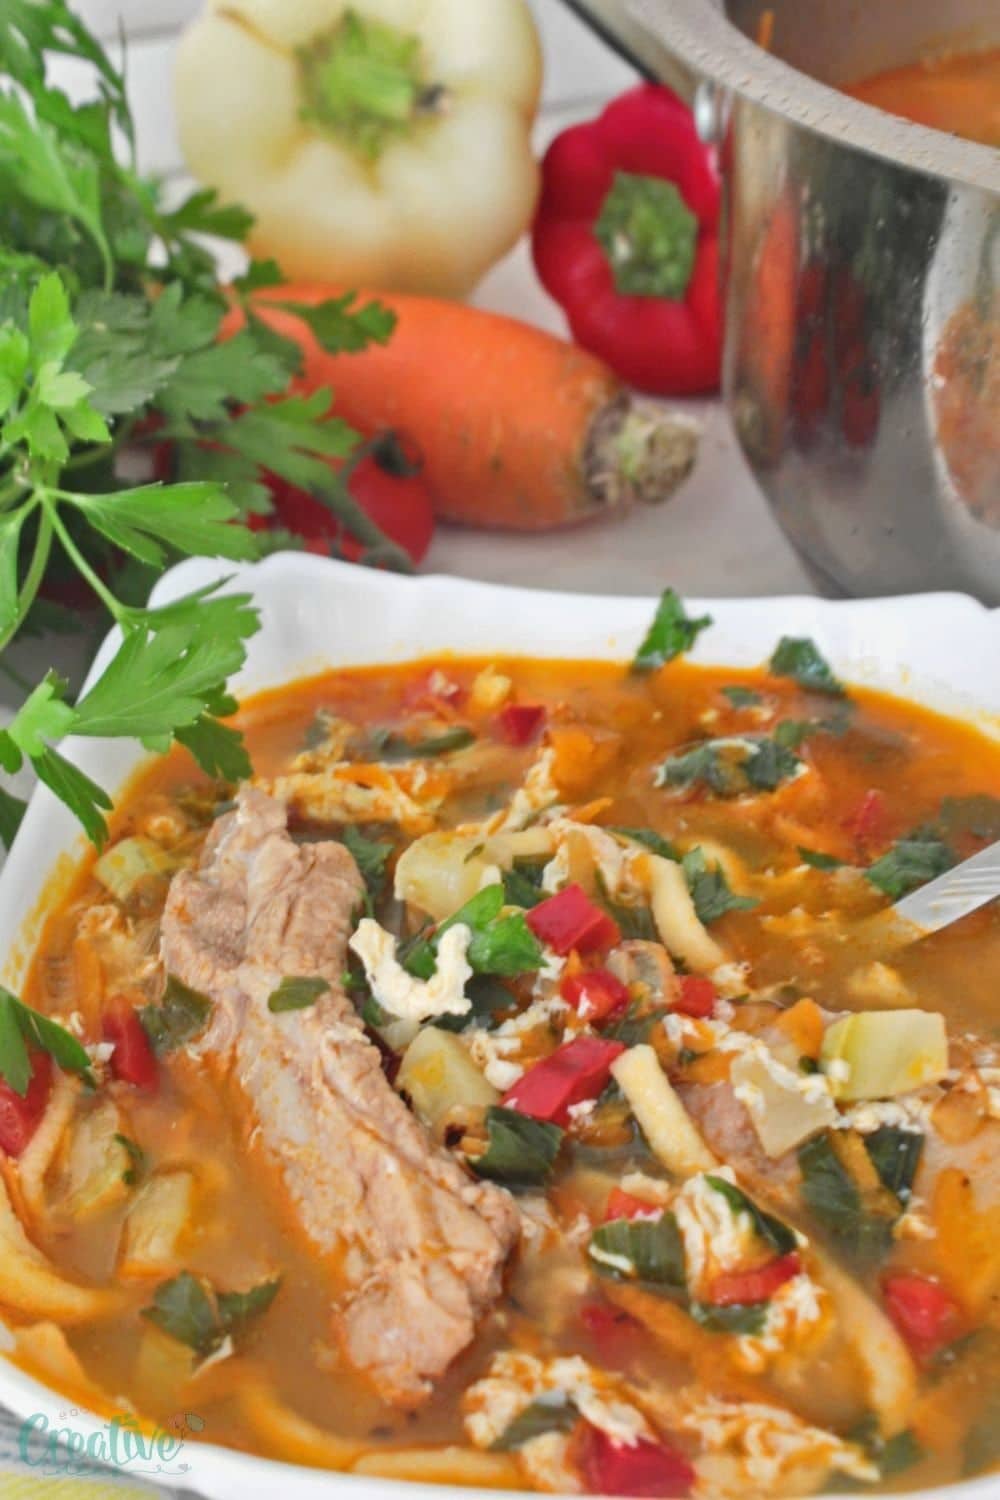 PORK RIB SOUP with vegetables and noodles